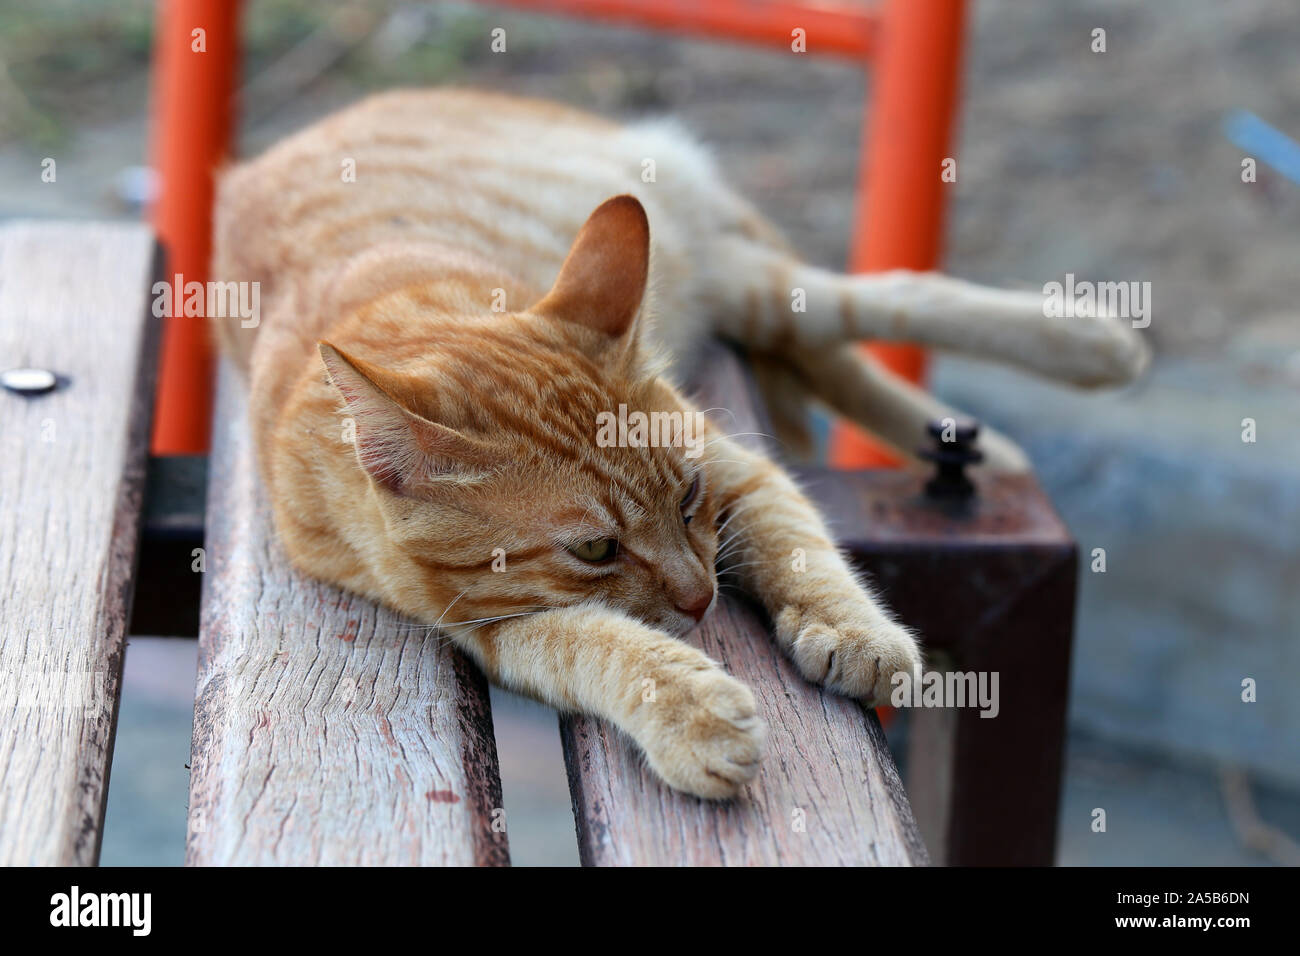 Cute wild cat photographed in the island of Cyprus. Fluffy, furry animal. This cat is a striped orange / brown one and it is sleeping on a bench. Stock Photo